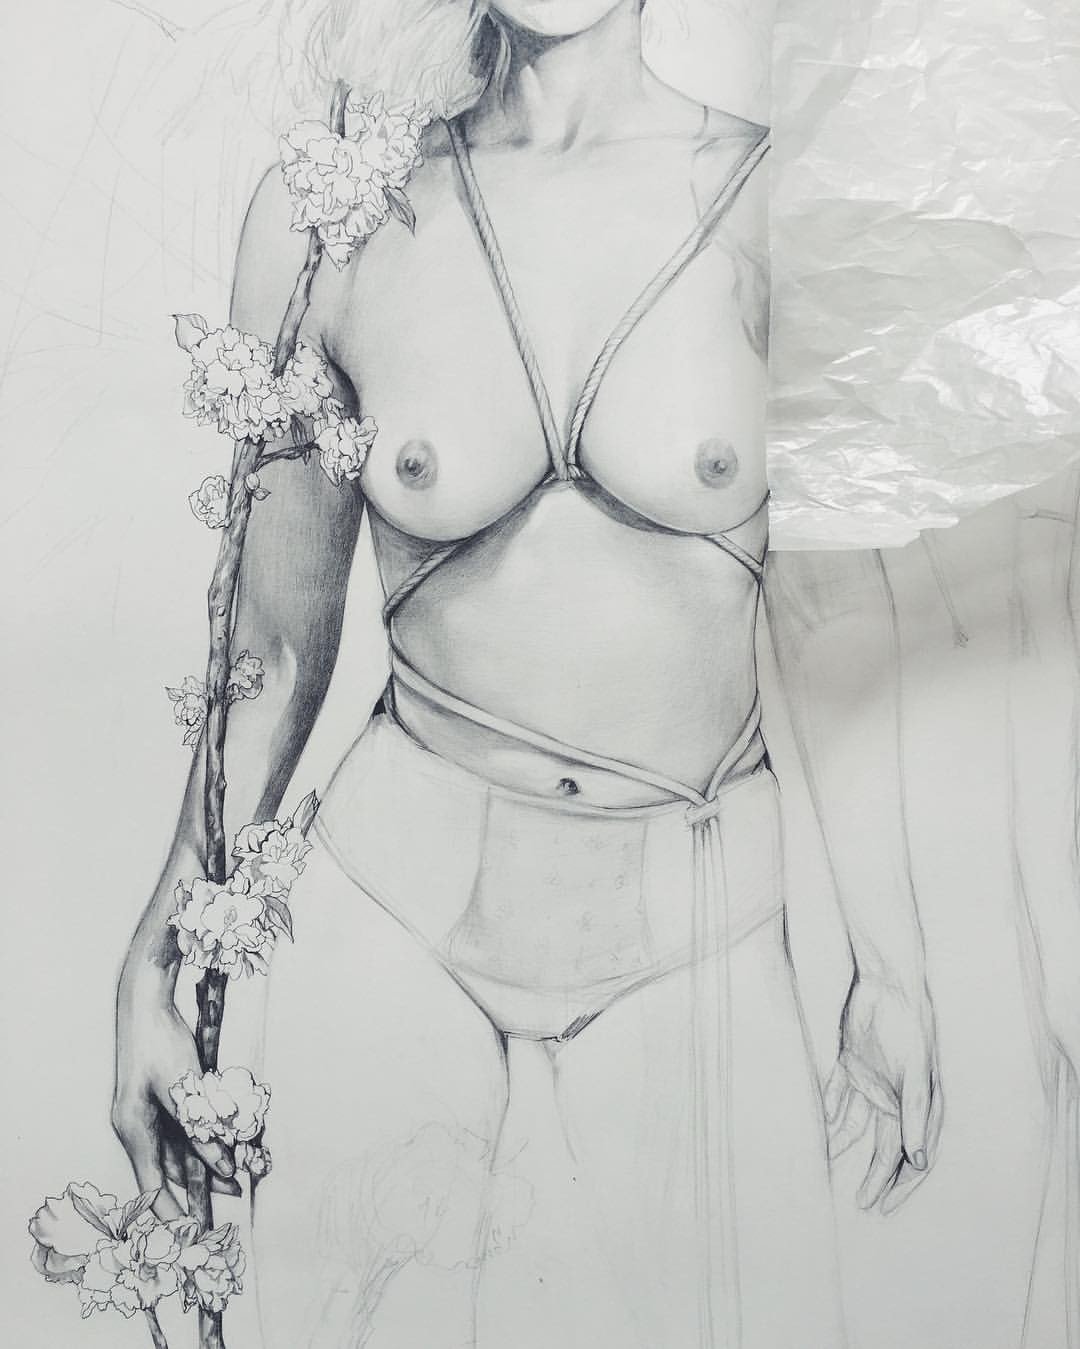 Watch the Photo by Pothos.Erote with the username @Pothos-Erote, posted on May 7, 2016 and the text says 'helicewen:

Drawing detail #wip #publicintimacy # #drawing #spokeart'